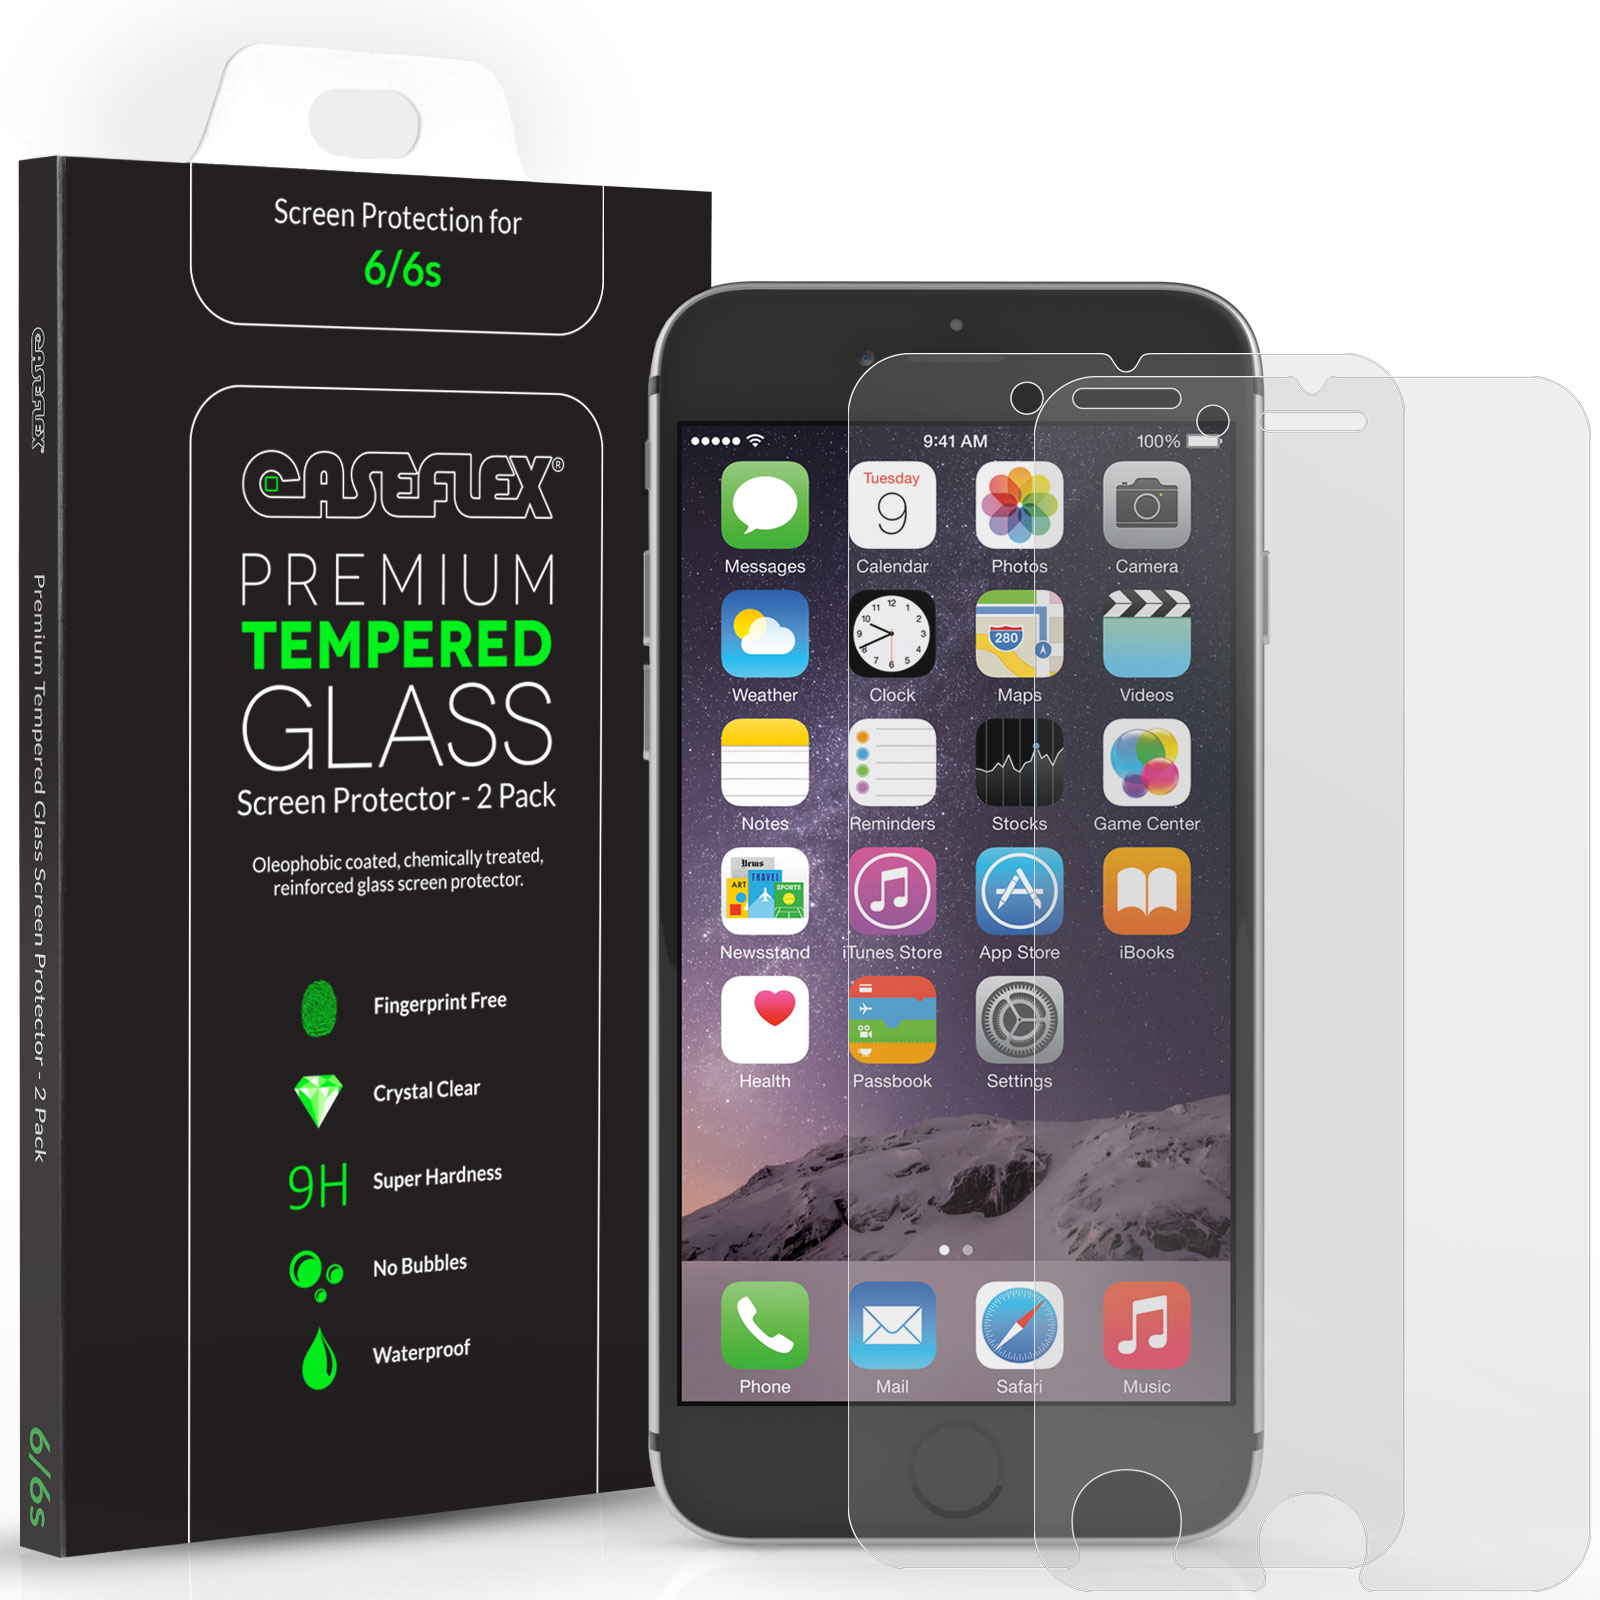 Caseflex iPhone 6S Screen Protector Tempered Glass - 2 Pack [3D Touch Compatible 0.2mm Thickness / 9H Hardness Rating]